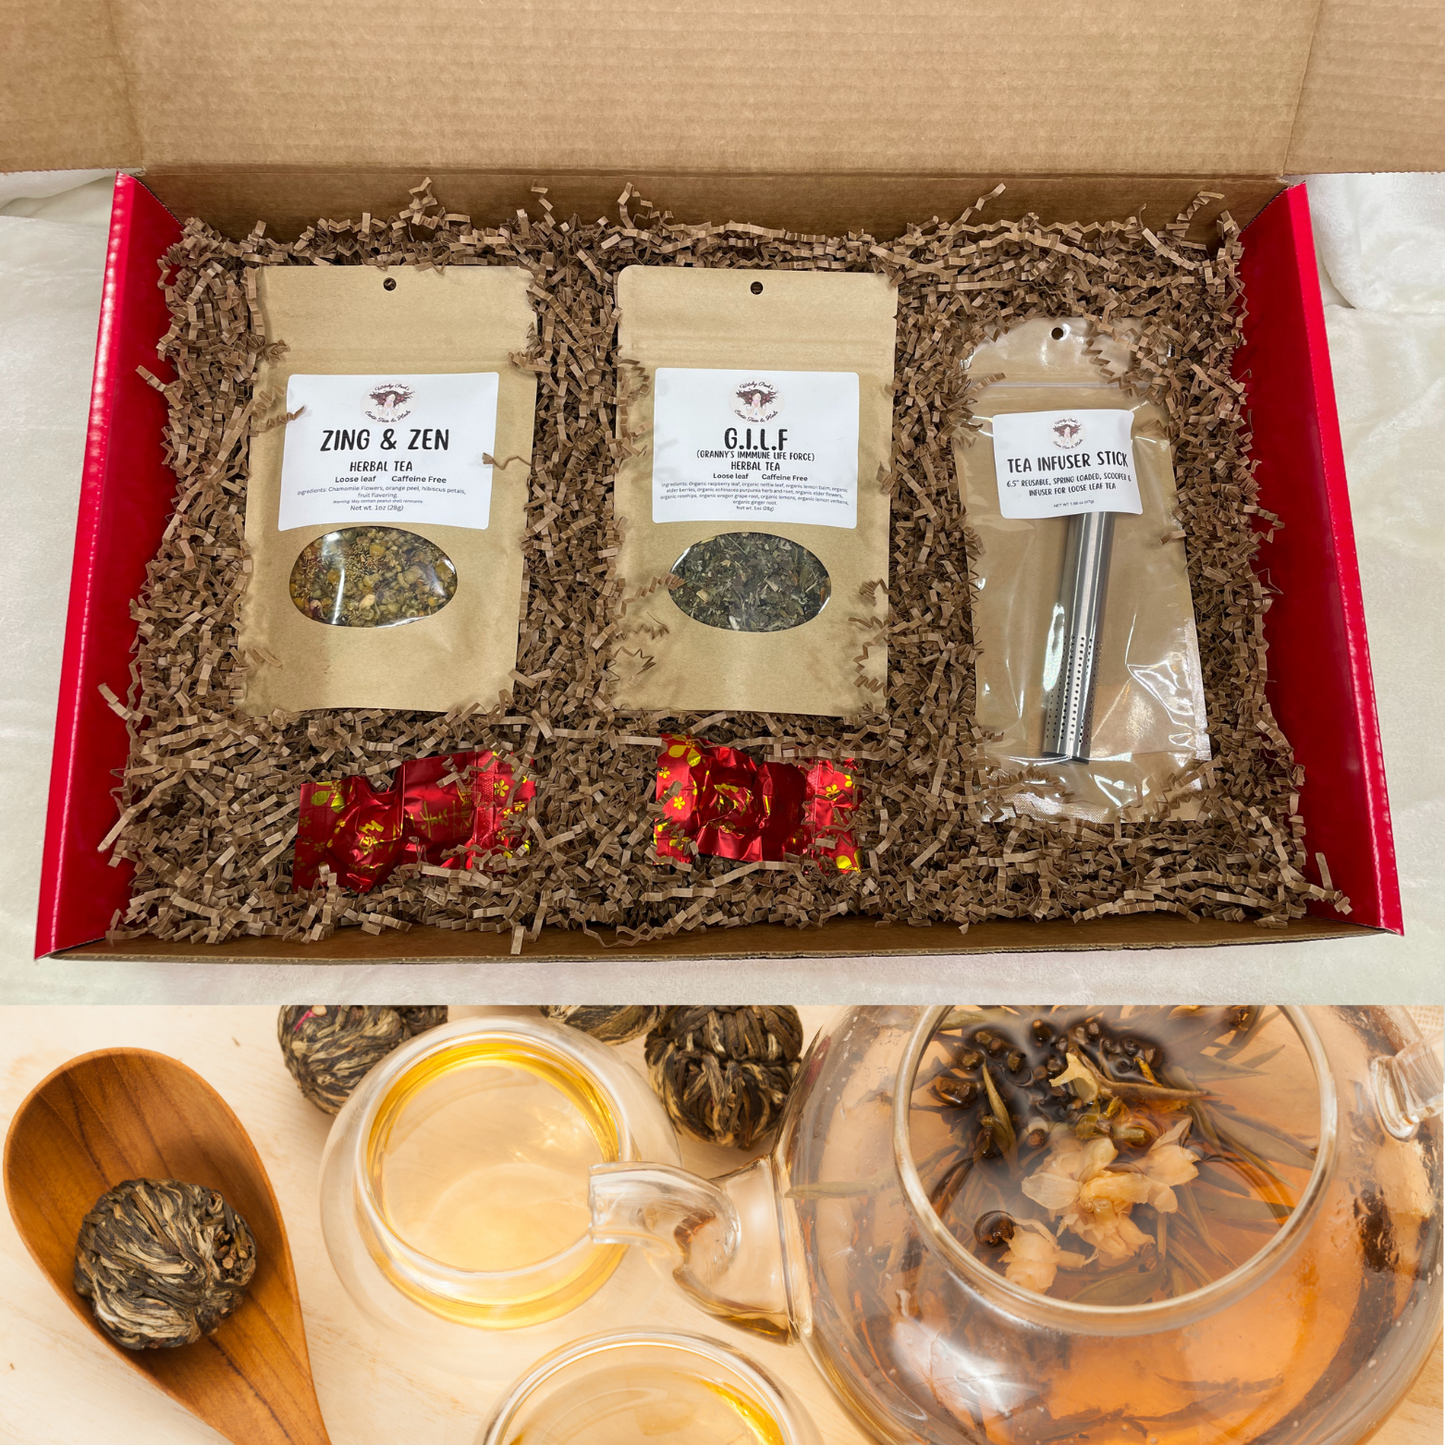 Witchy Pooh's Gift Box Set with 2-1oz Pouches of Tea, A Spring Action Tea Infuser Stick, 2 Blooming Tea Balls in a Large Red Mailer Box